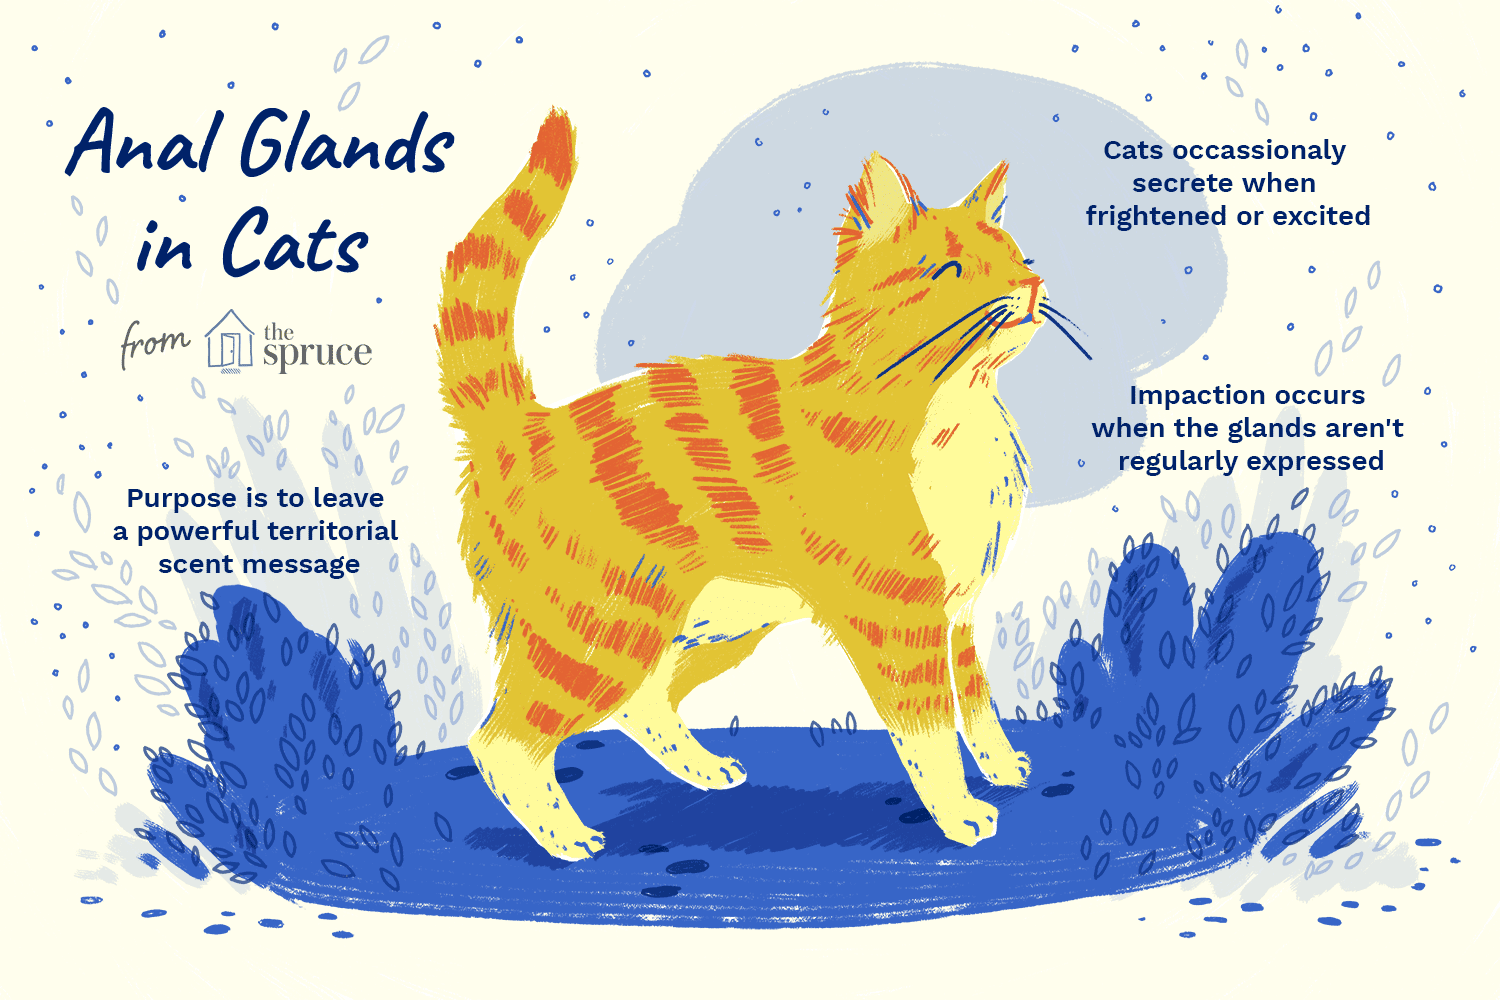 anal glands in cats illustration